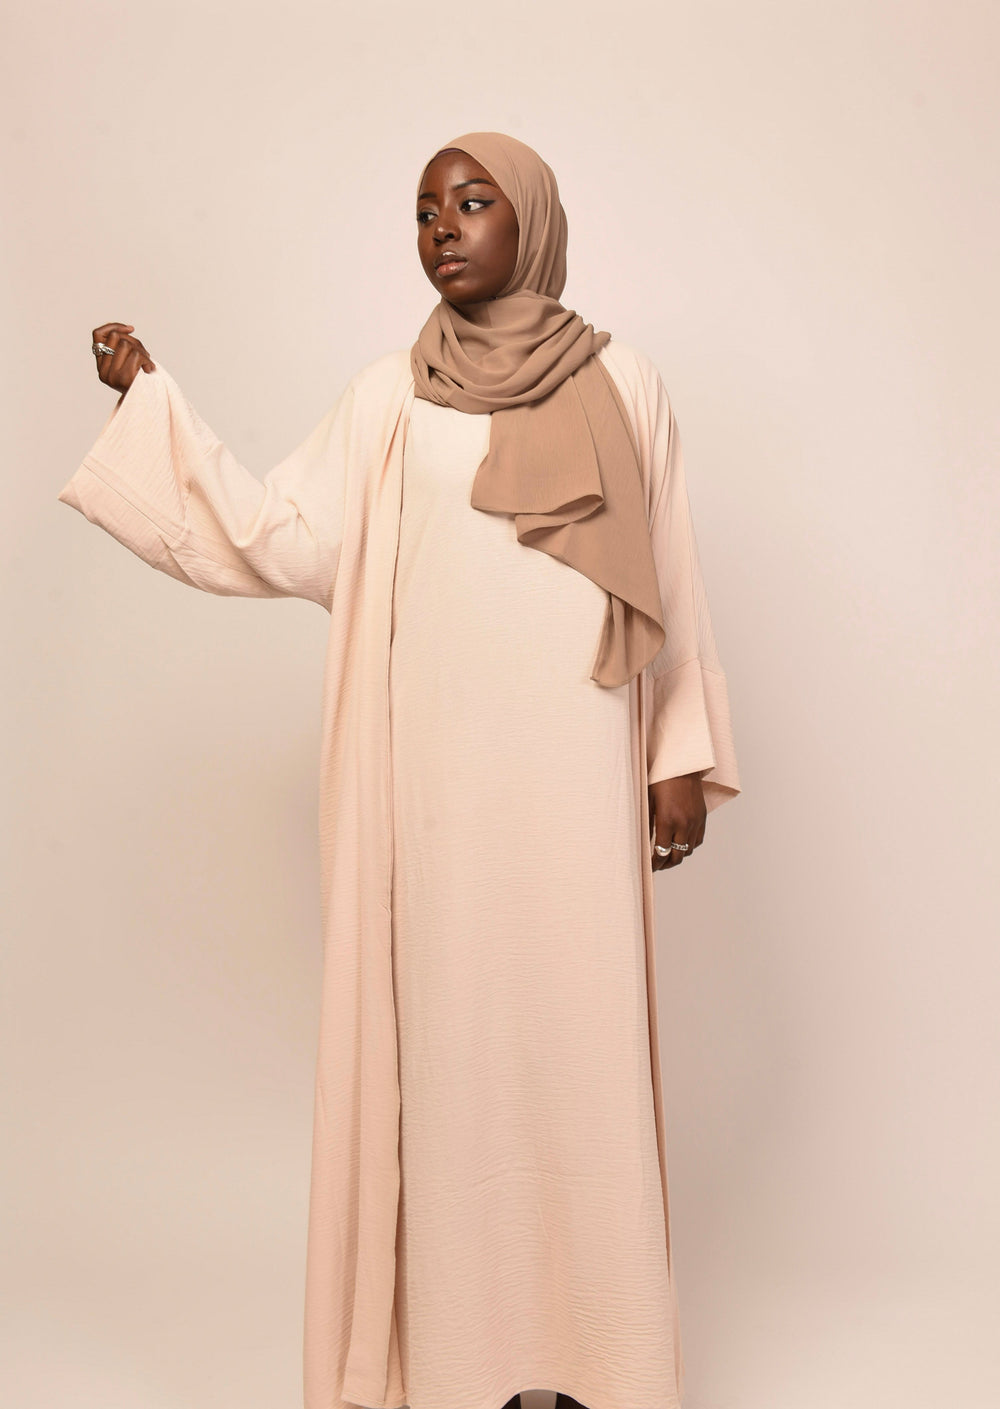 Get trendy with Lea 2-Piece Abaya Set - Beige -  available at Voilee NY. Grab yours for $74.90 today!